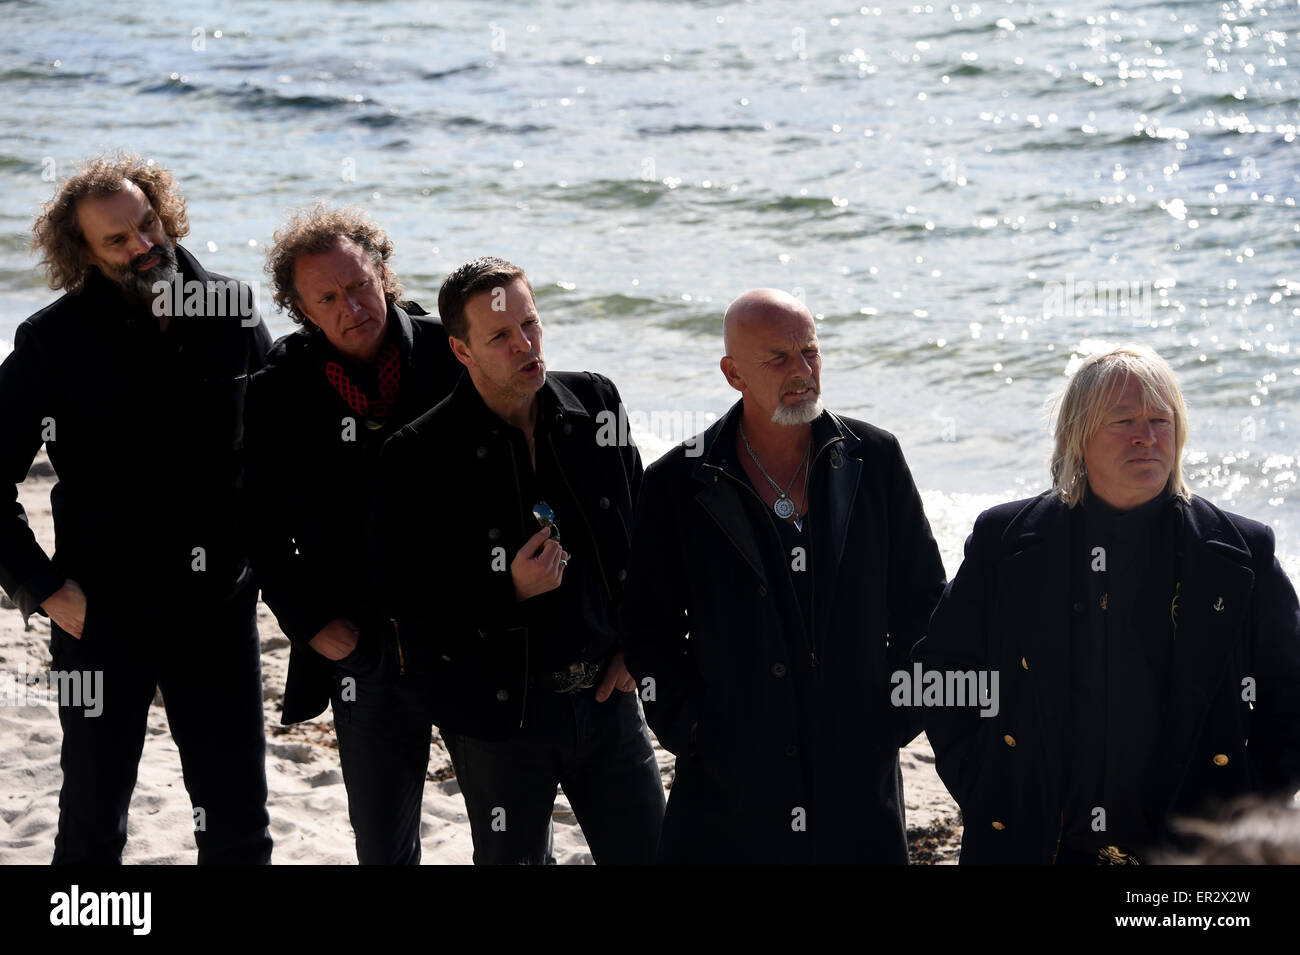 Gluecksburg, Germany. 20th May, 2015. The members of the band 'Santiano' (L-R): Hans-Timm Hinrichsen, Andreas Fahnert, Axel Stosberg, Bjoern Both and Pete Sage pose at the beach in Gluecksburg, Germany, 20 May 2015. The group is presenting its third album entitled 'Von Liebe, Tod und Freiheit' (lit. About love, death and freedom). Photo: Carsten Rehder/dpa/Alamy Live News Stock Photo